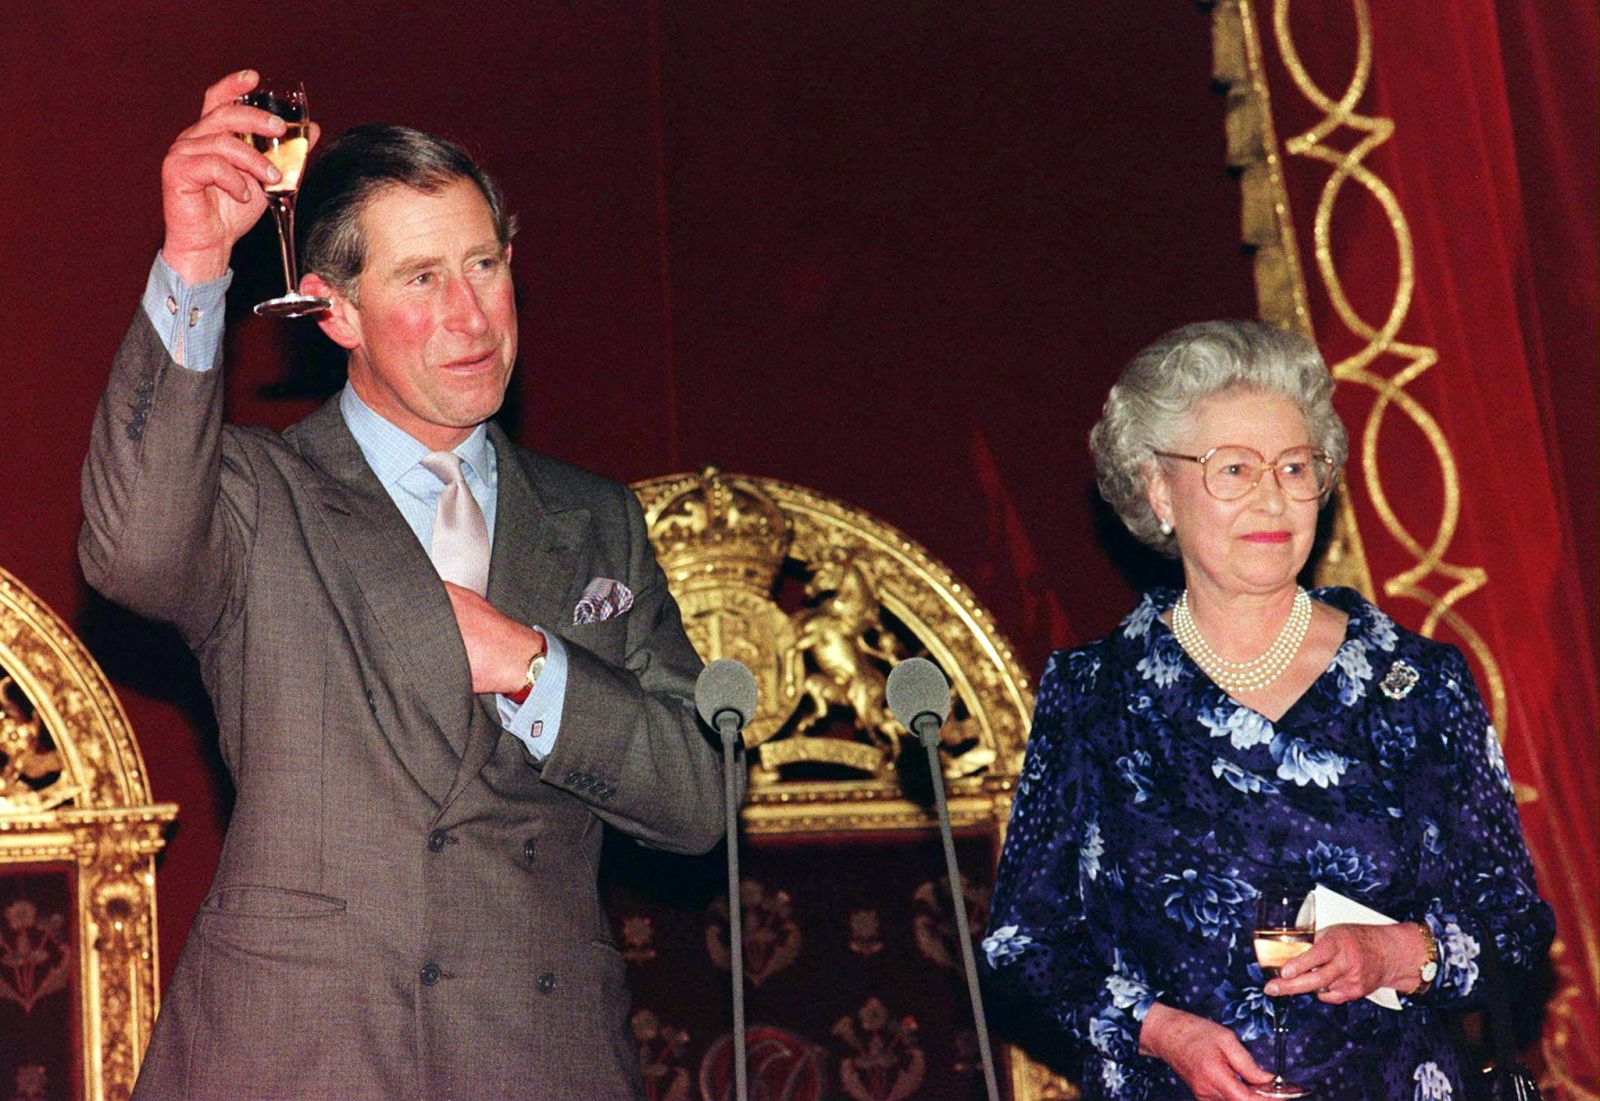 epa10170594 (FILE) - Britain's Prince Charles raises his glass in response to a toast from his mother, Queen Elizabeth II (R) during a reception in his honour on the eve of his 50th birthday at Buckingham Palace in London, Britain, 13 November 1998 (reissued 08 September 2022). According to a statement issued by Buckingham Palace on 08 September 2022, Britain's Queen Elizabeth II has died at her Scottish estate, Balmoral Castle, on 08 September 2022. The 96-year-old Queen was the longest-reigning monarch in British history.  EPA/JOHN STILLWELL / POOL UK AND IRELAND OUT SHUTTERSTOCK OUT *** Local Caption *** 99419691